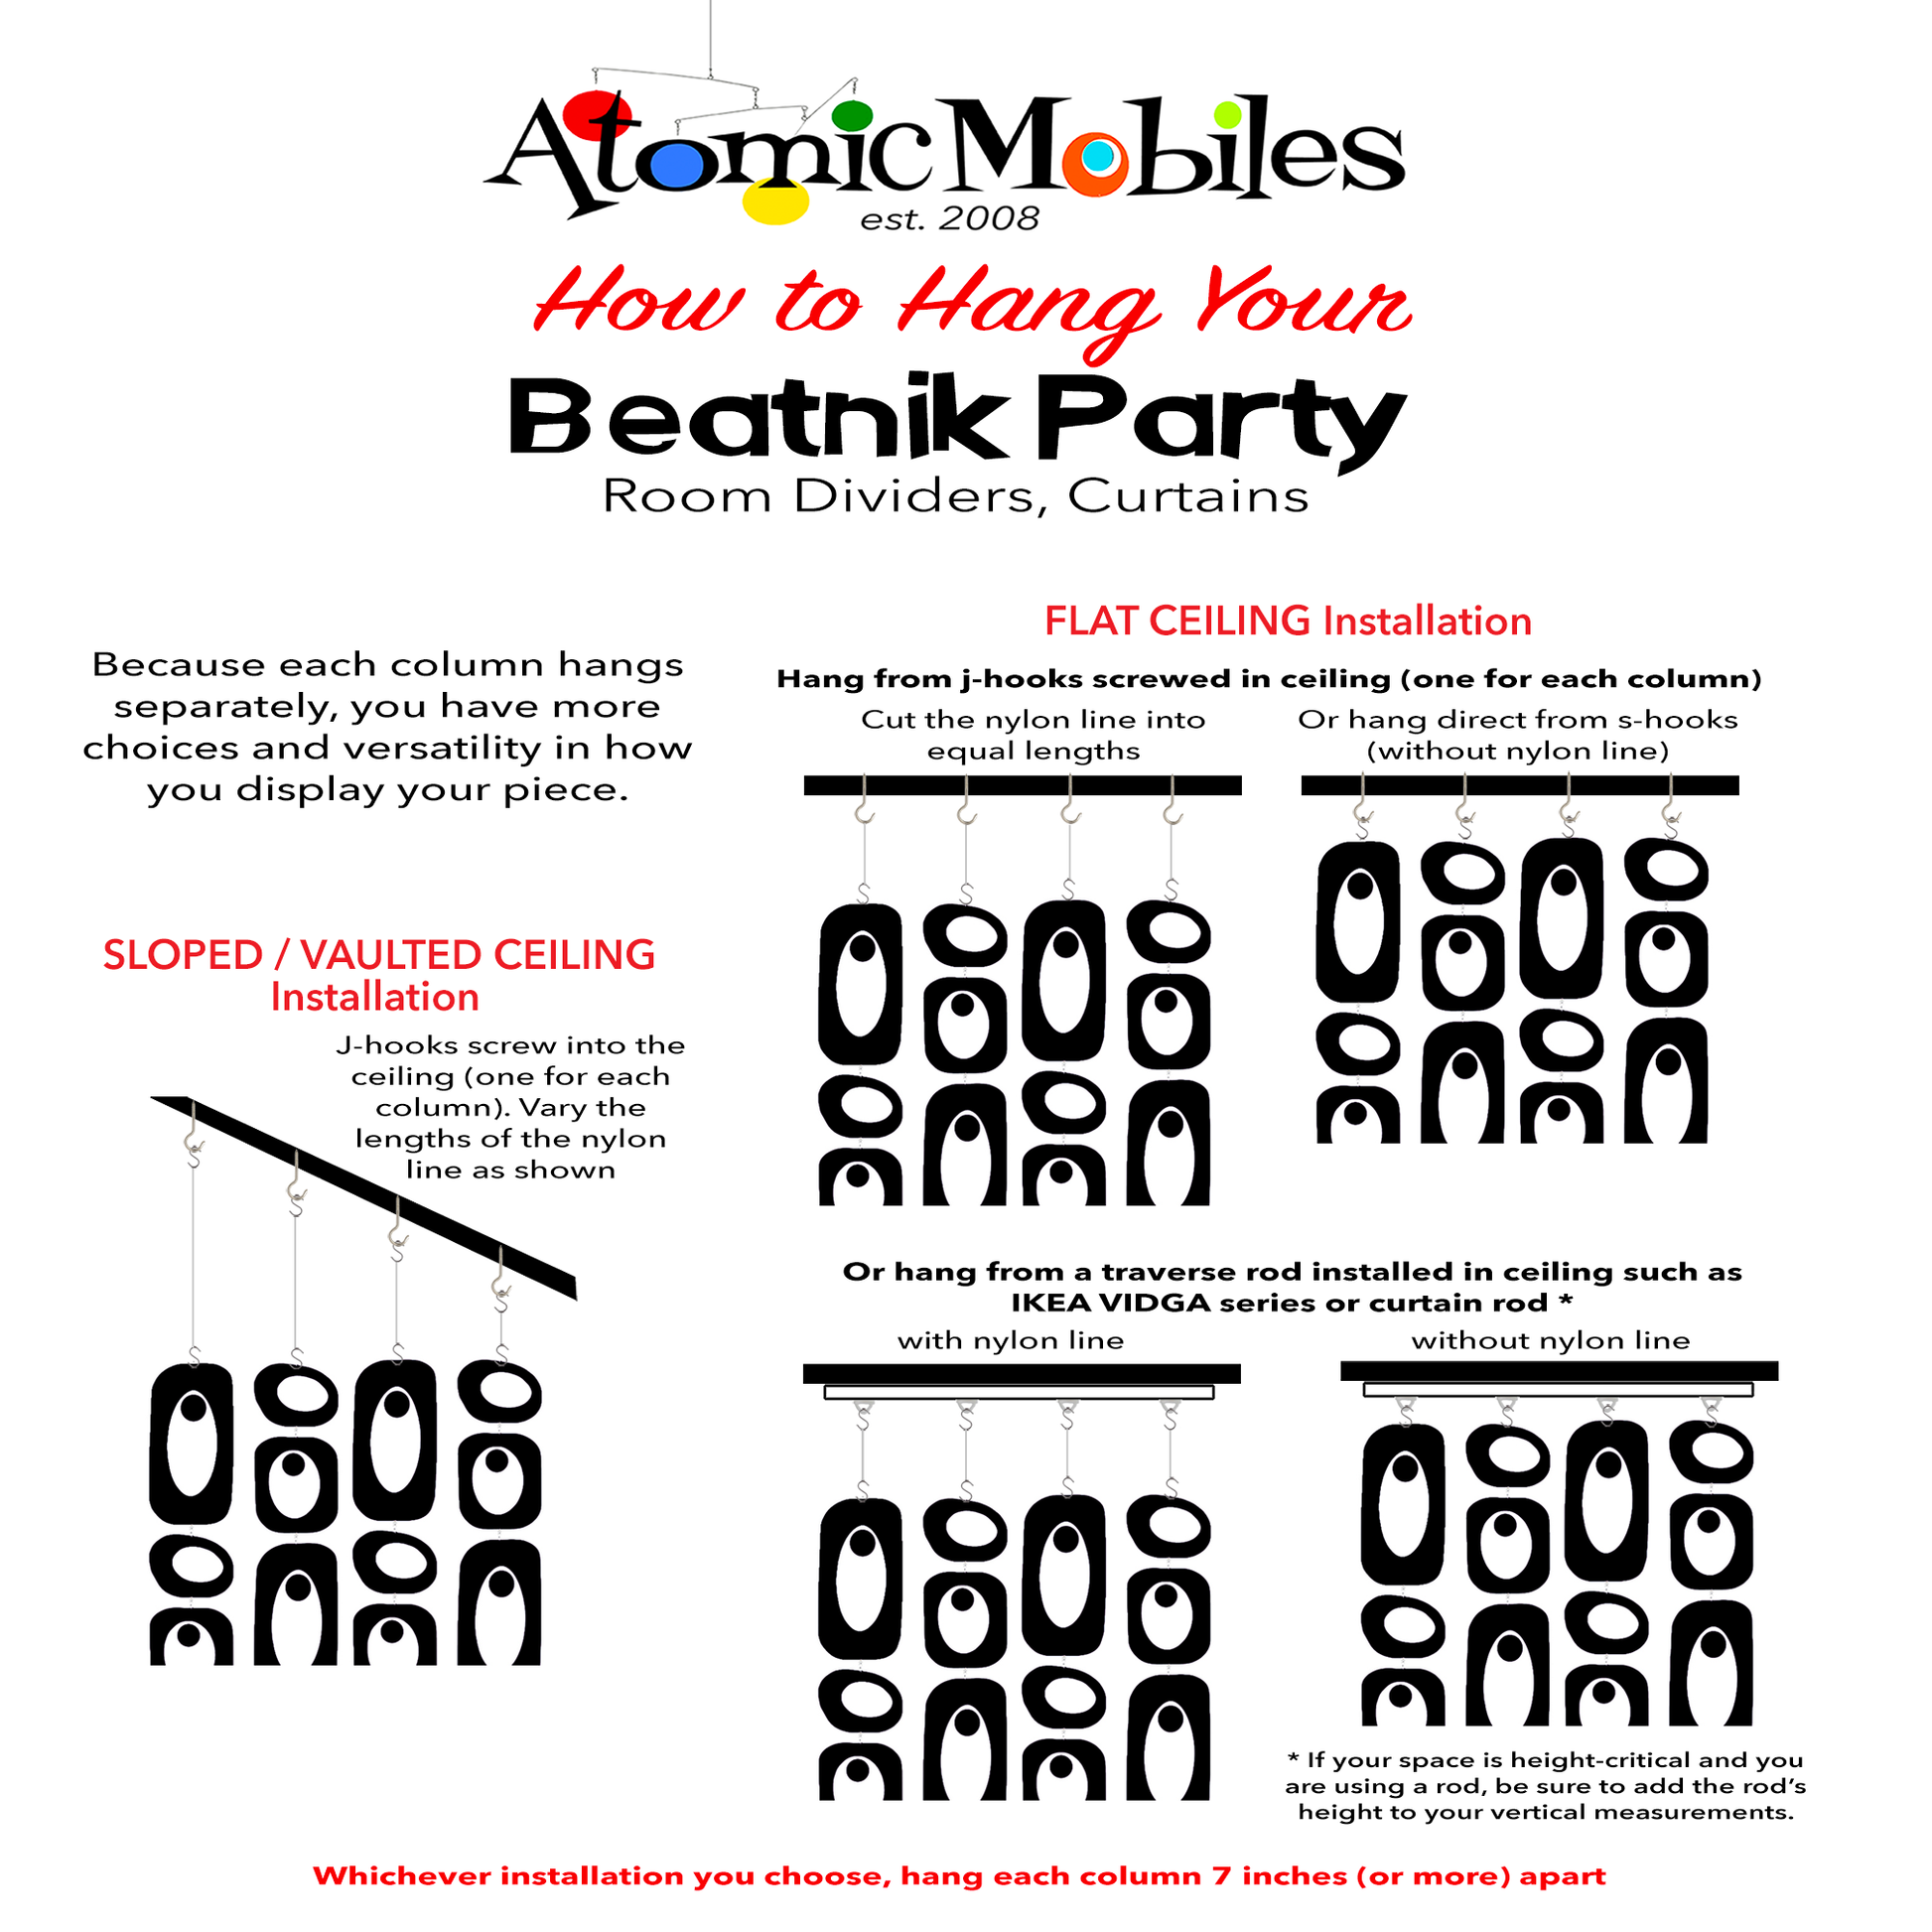 How to hang your Beatnik Party Room Divider, Mobile, and Curtain by AtomicMobiles.com